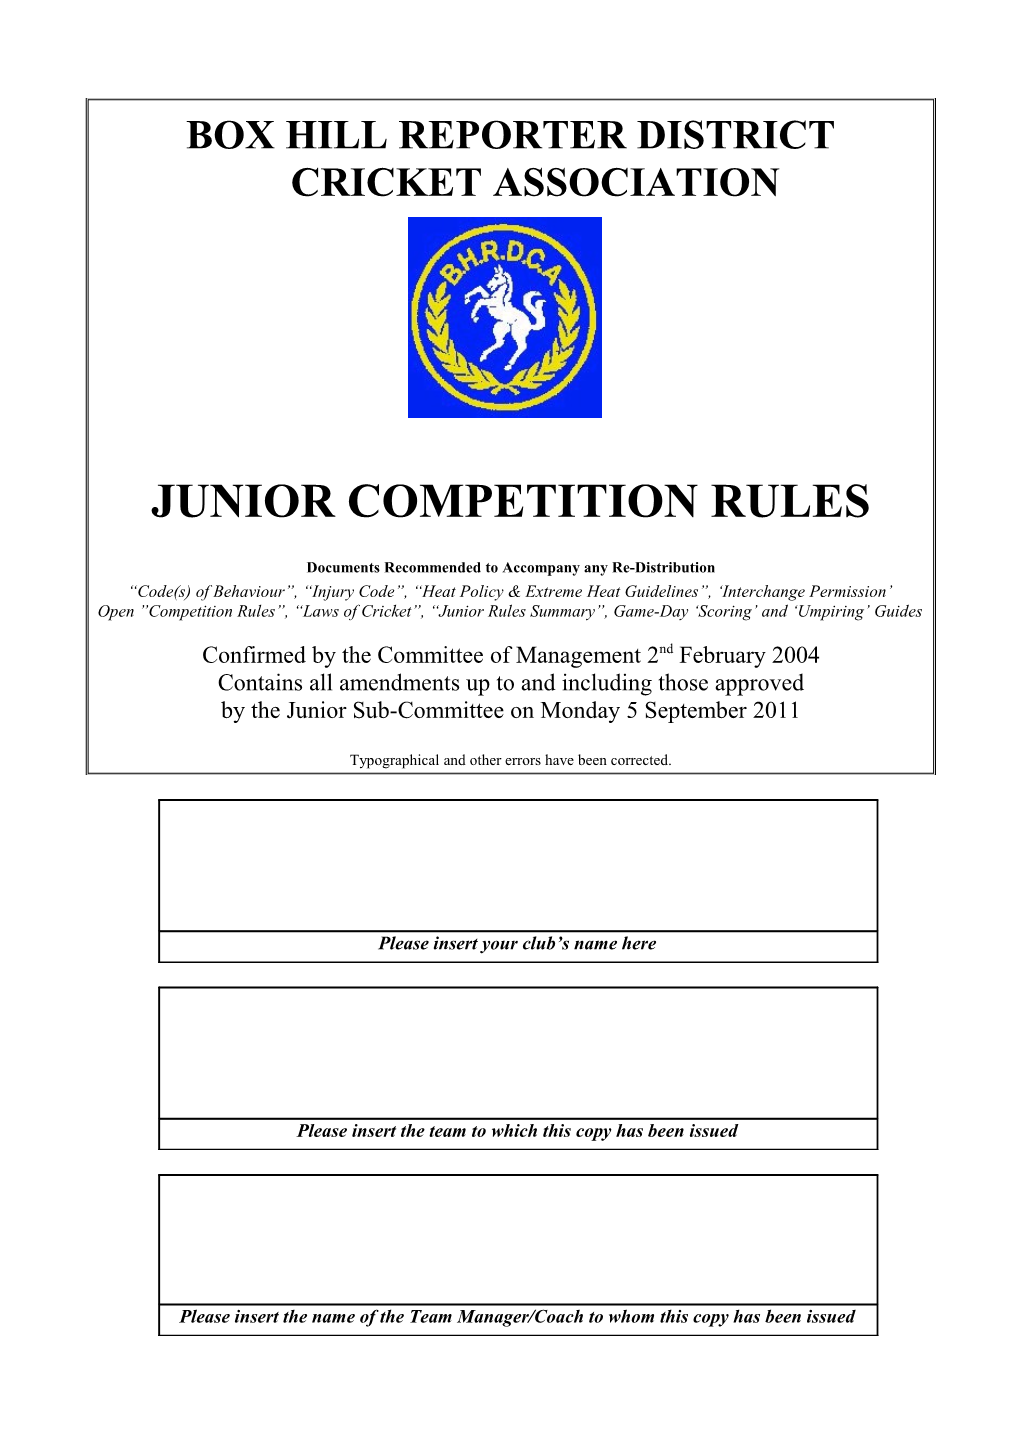 BHRDCA Junior Competition Rules